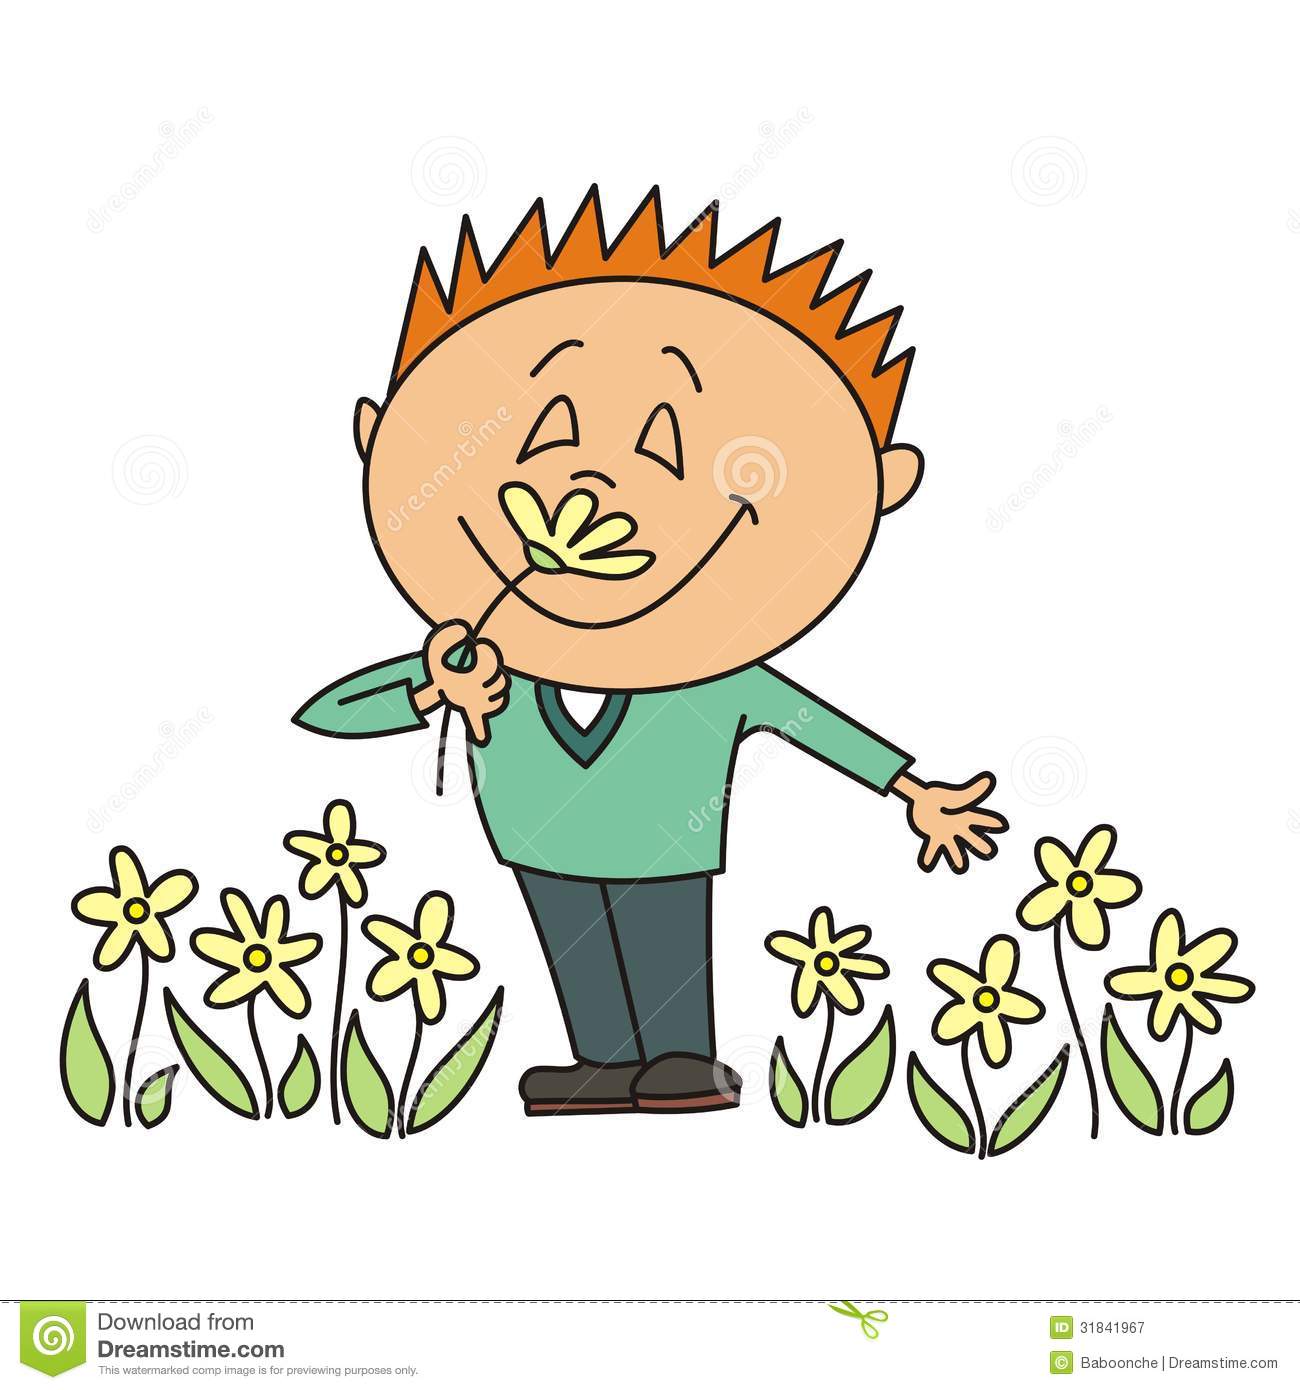 Boy Smelling A Flower Royalty Free Stock Photography   Image  31841967